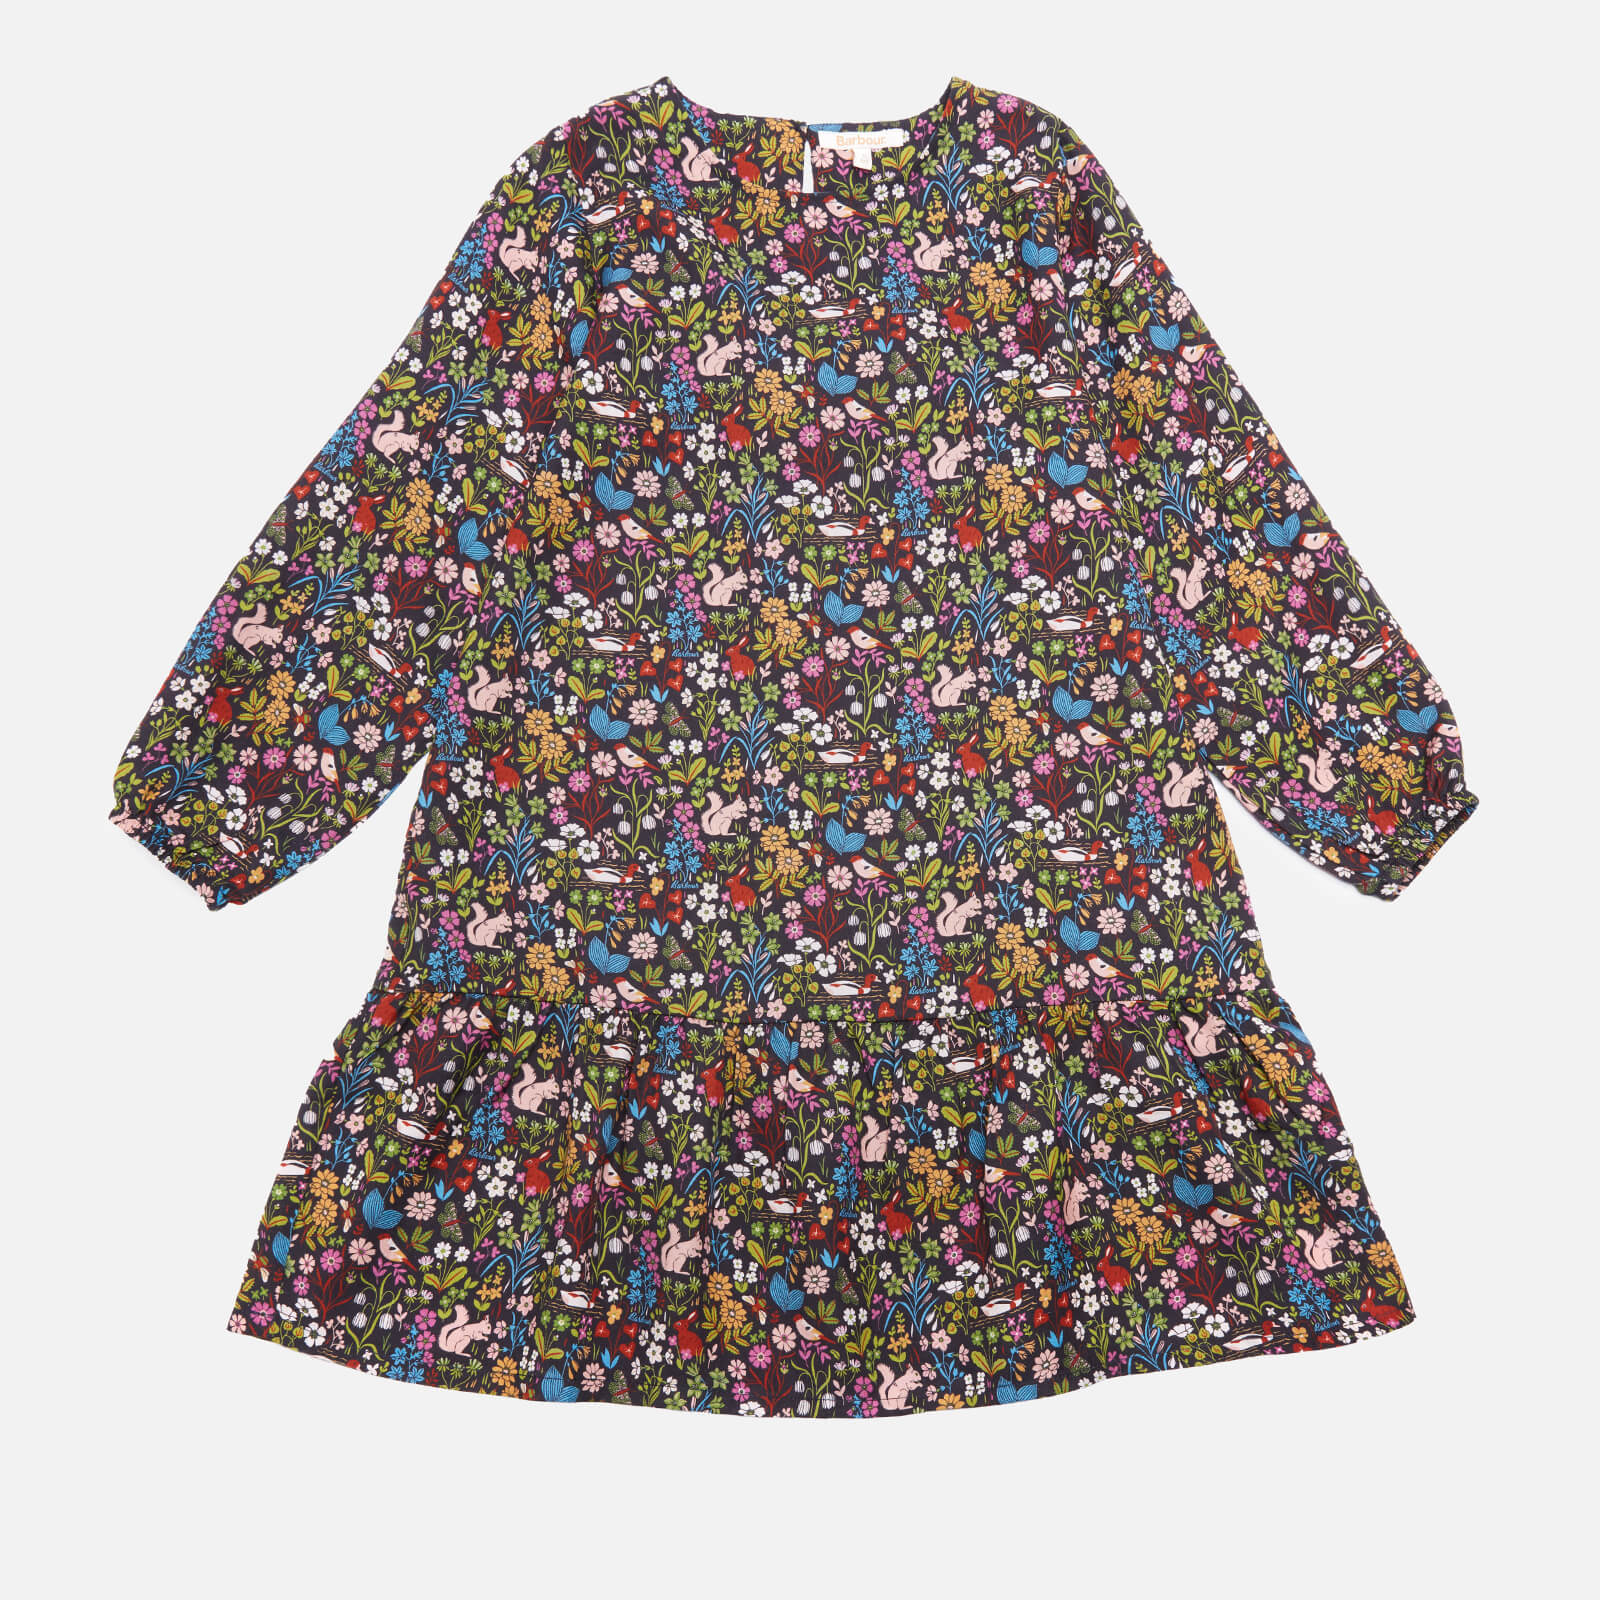 Barbour Girls' Amelie Dress - Multi - S (6-7 Years)